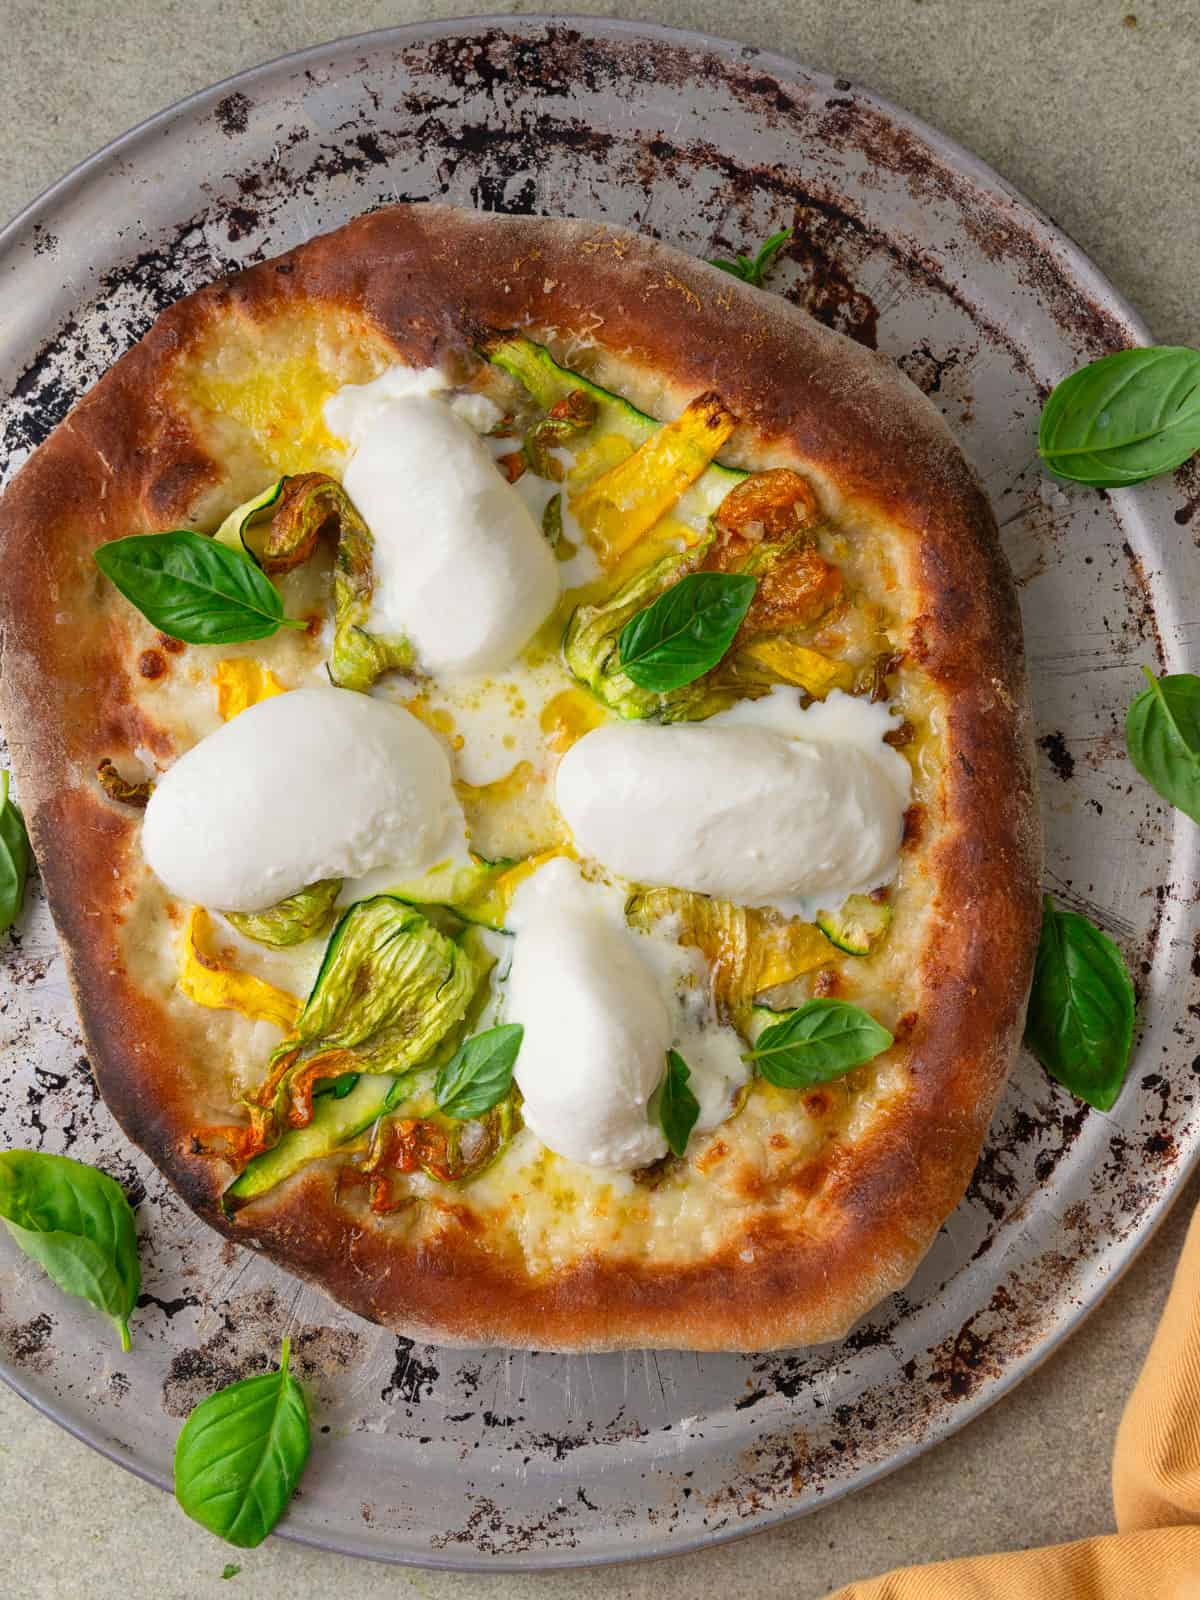 Zucchini flower pizza topped with burrata and fresh basil leaves.